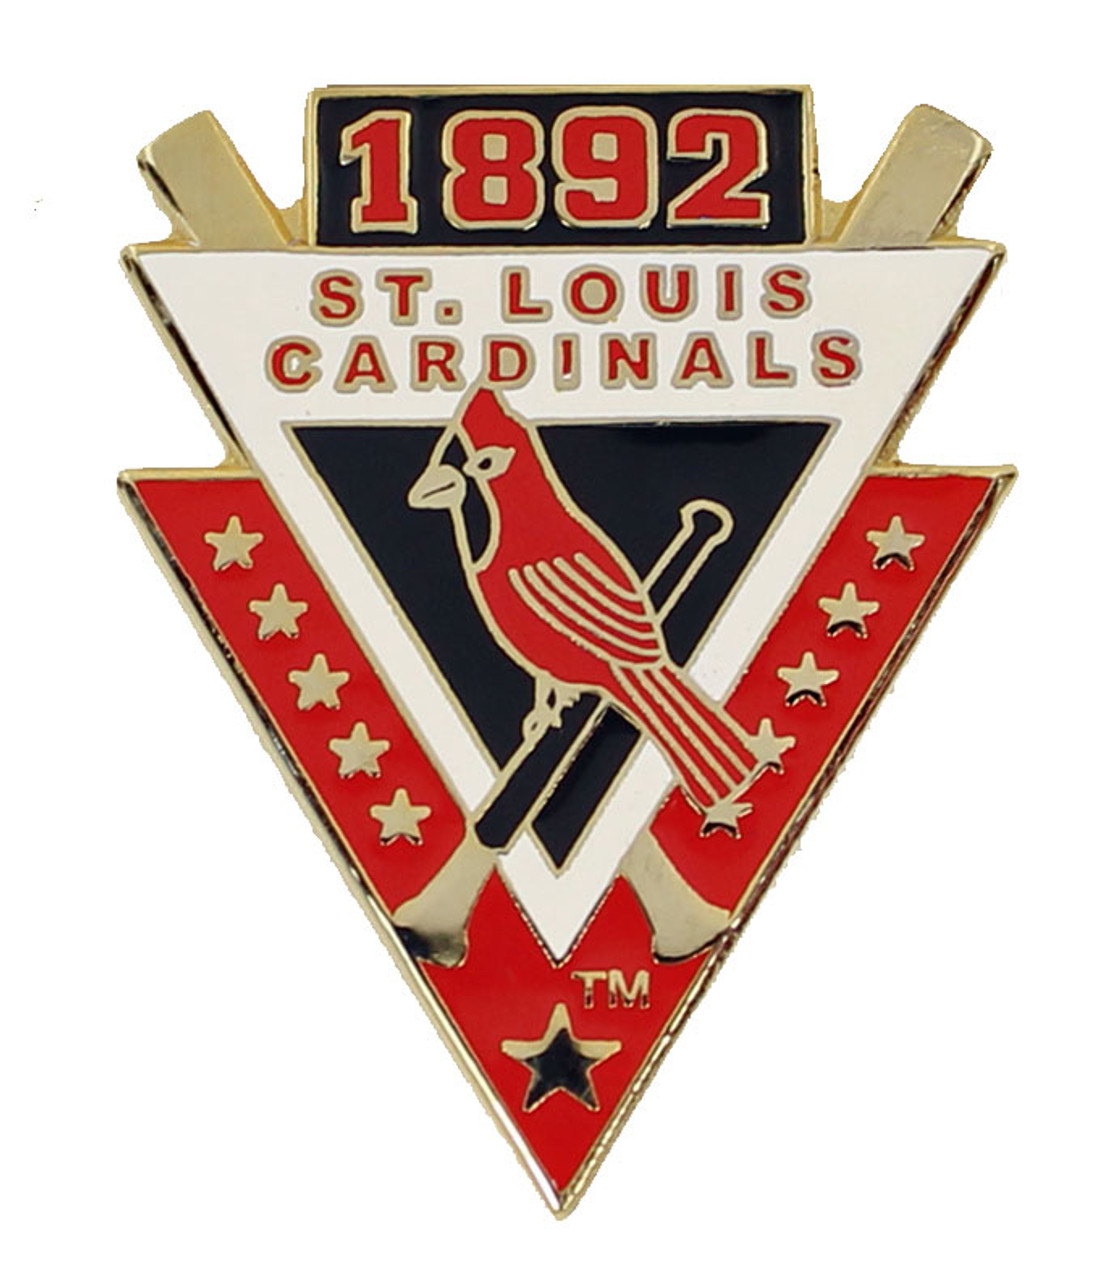 St. Louis Cardinals 1892 Pin - First Year In NL